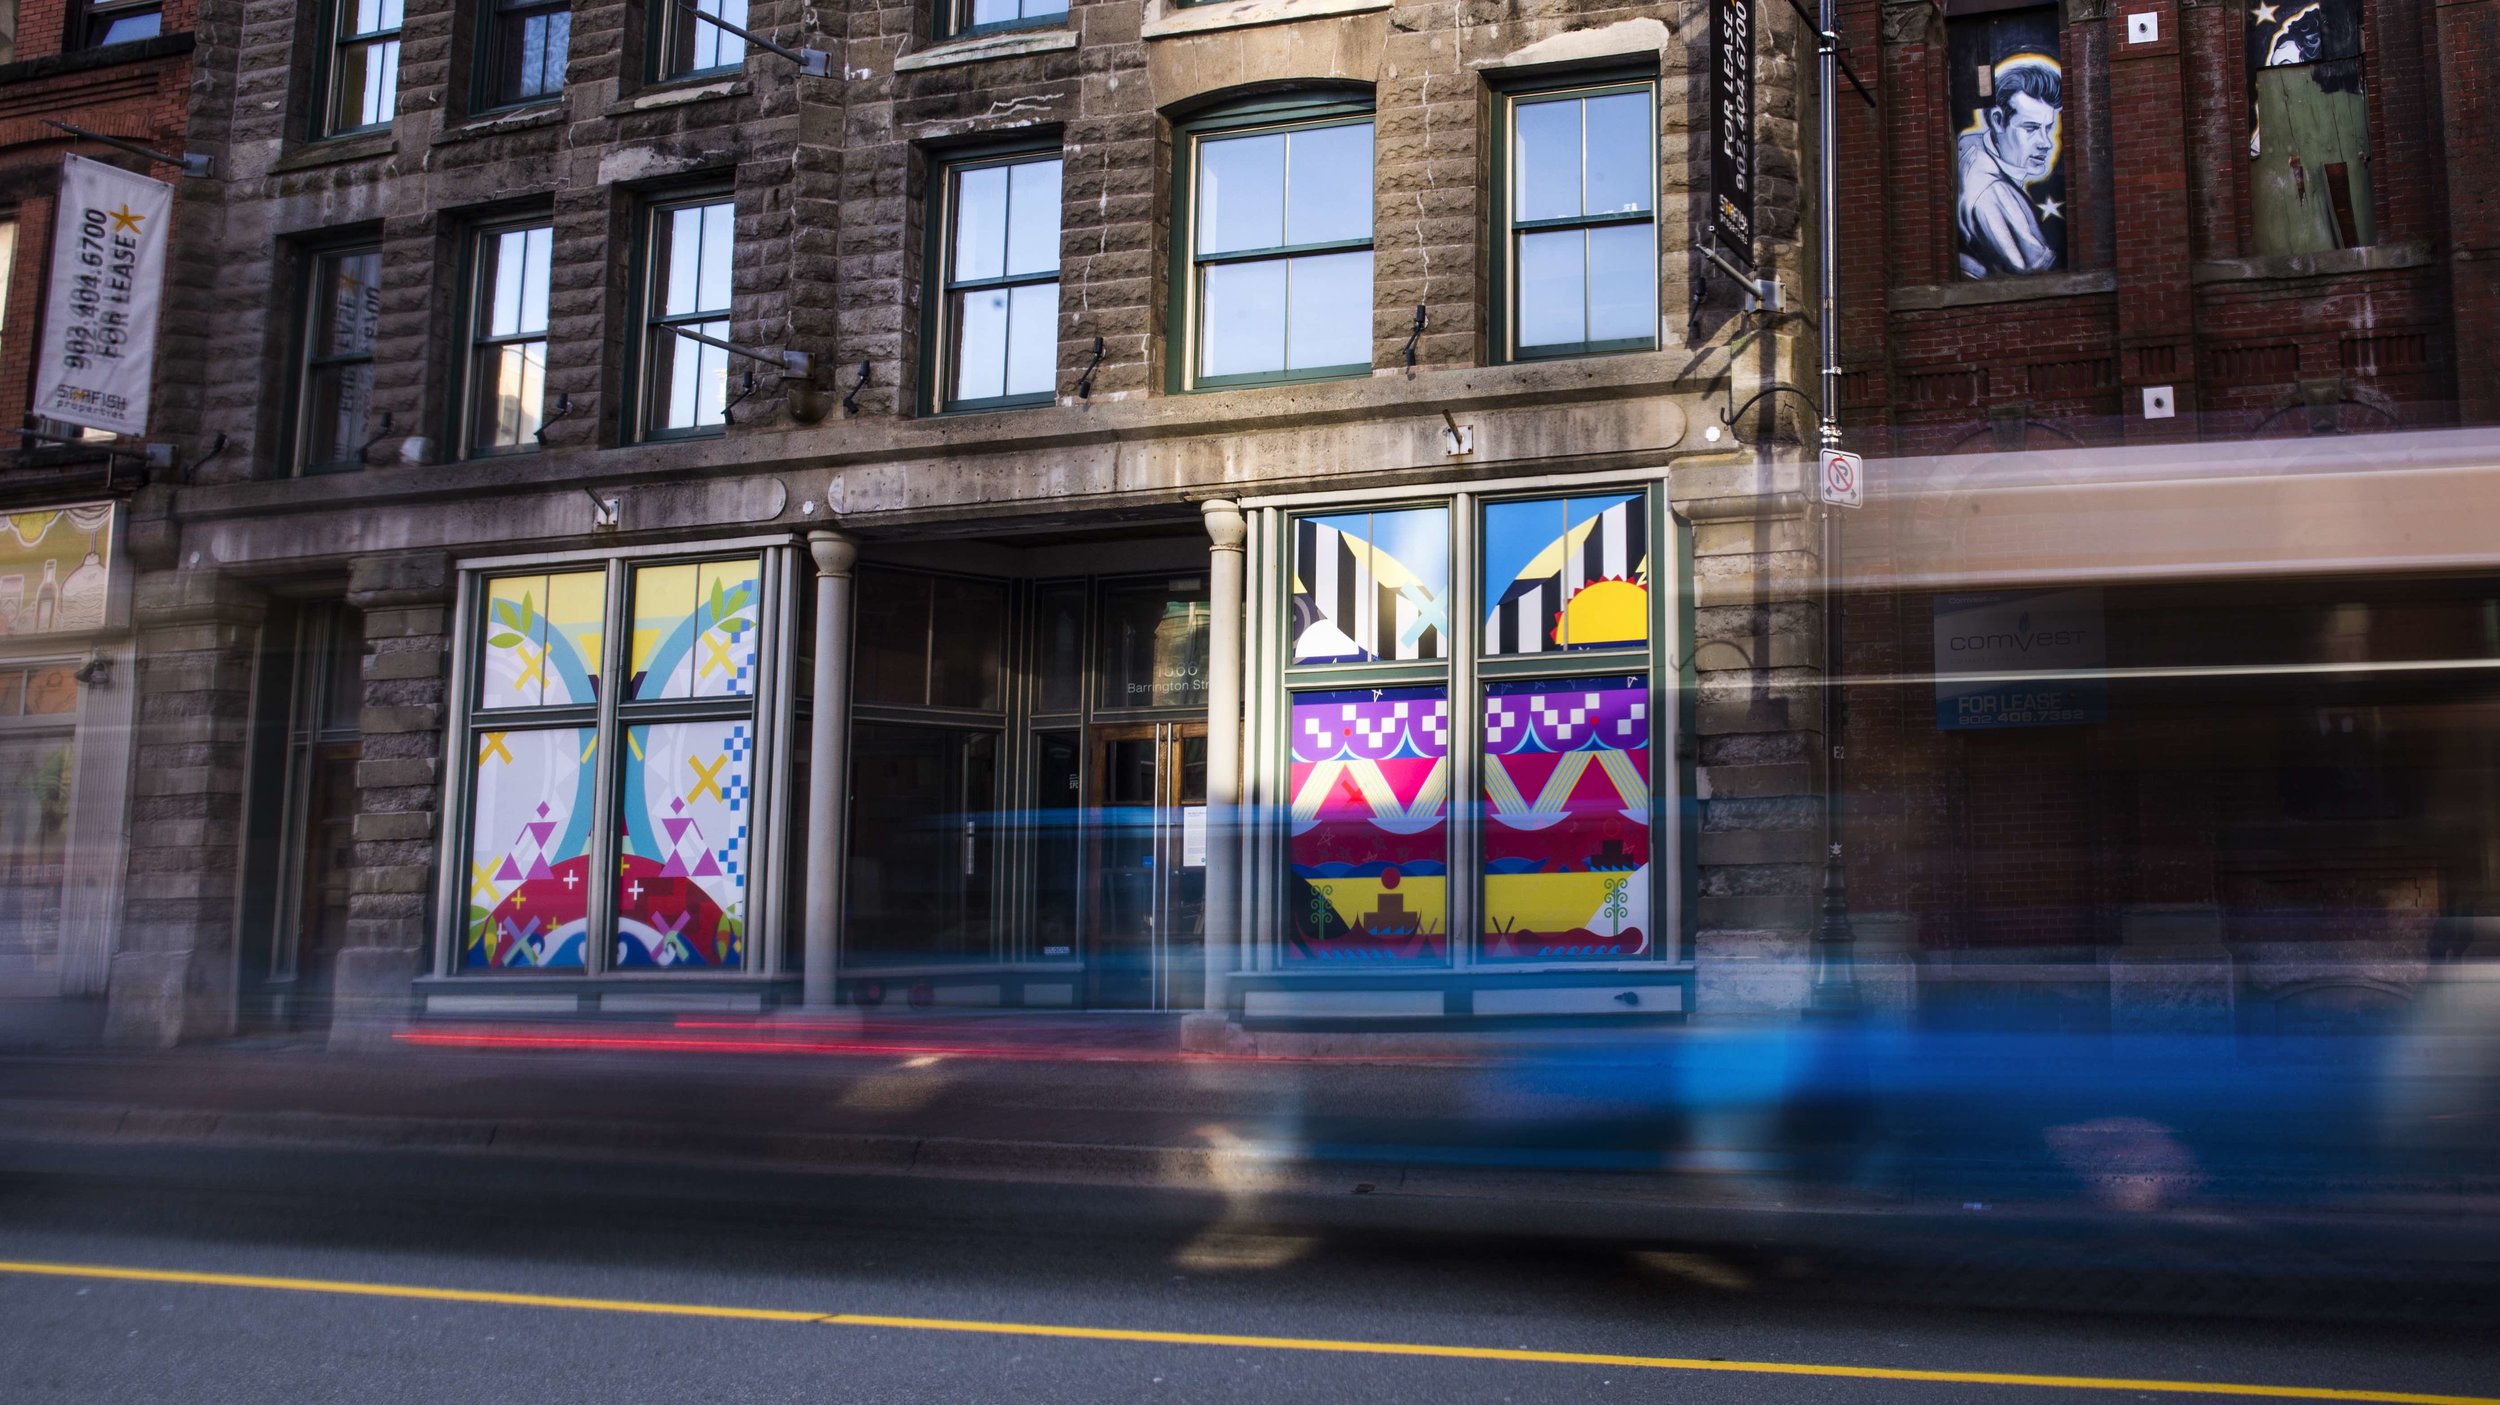   Ne’ata’q (Sun is Coming Out) 2019   1566 Barrington Street, Halifax, NS  Materials:  Print on Vinyl  Photo:  NOCTURNE Installation commissioned by  NOCTURNE , DHBC’s for Gritty to Pretty Program Project managed by  IOTA STUDIOS  